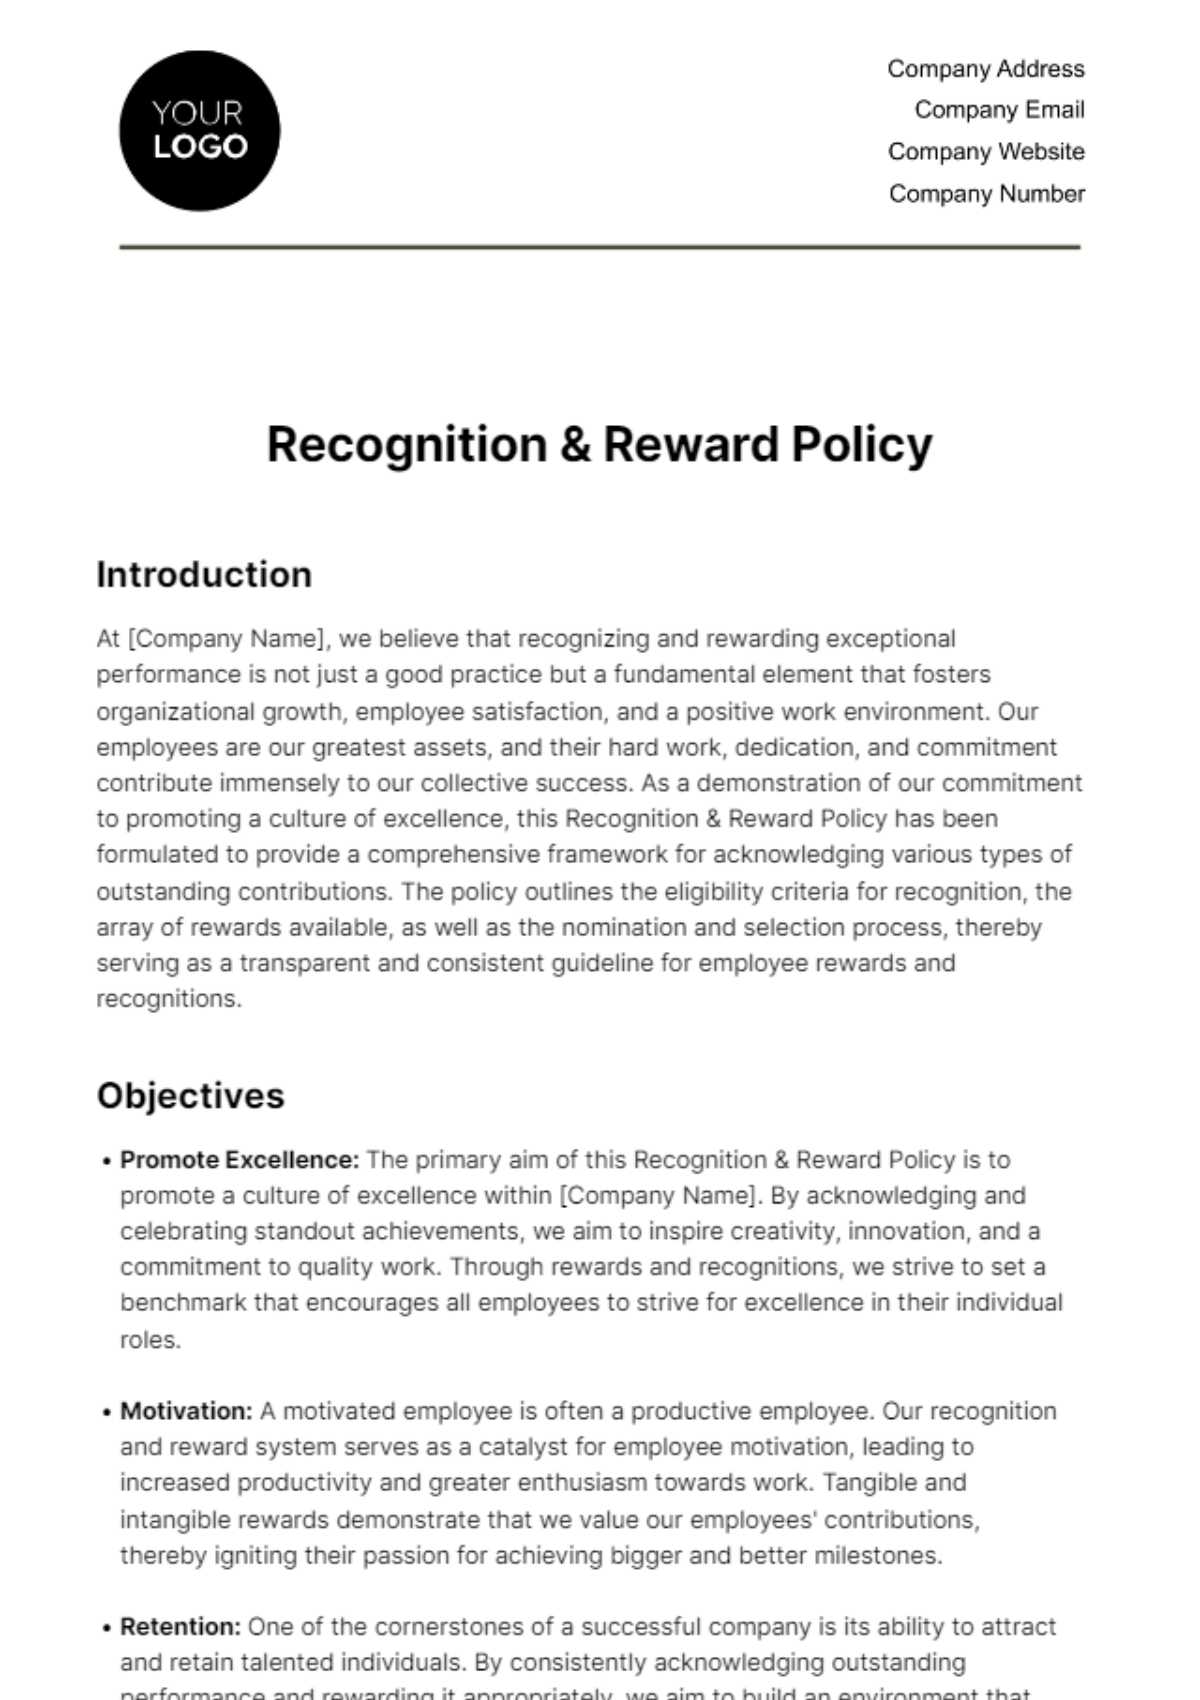 Free Recognition & Reward Policy HR Template